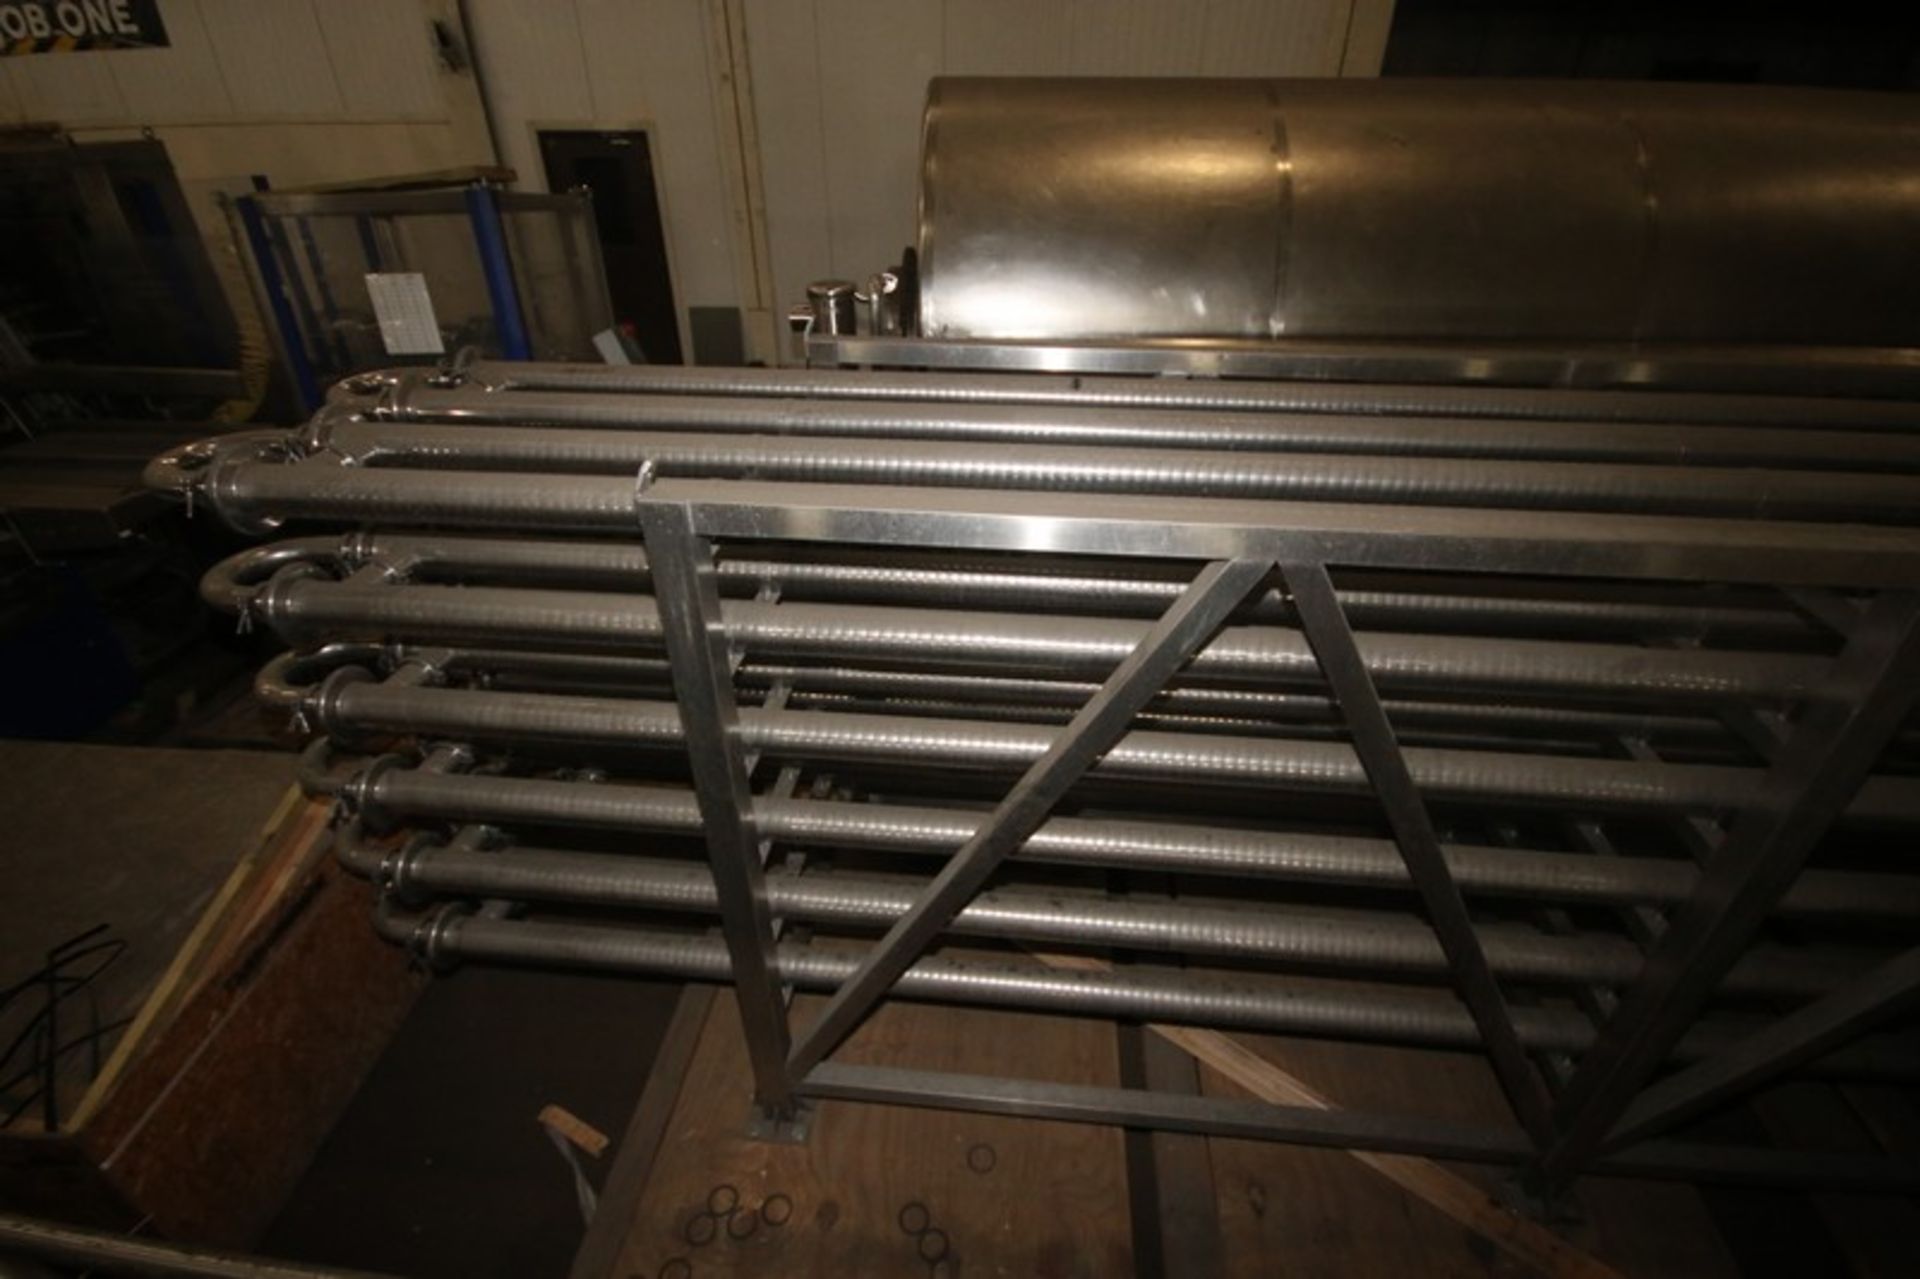 Aprox. 4" S/S Tubular Heat Exchanger, with (24) Tubes, Overall Dims.: 21' L x 48" W x 74" H, Mounted - Image 5 of 7